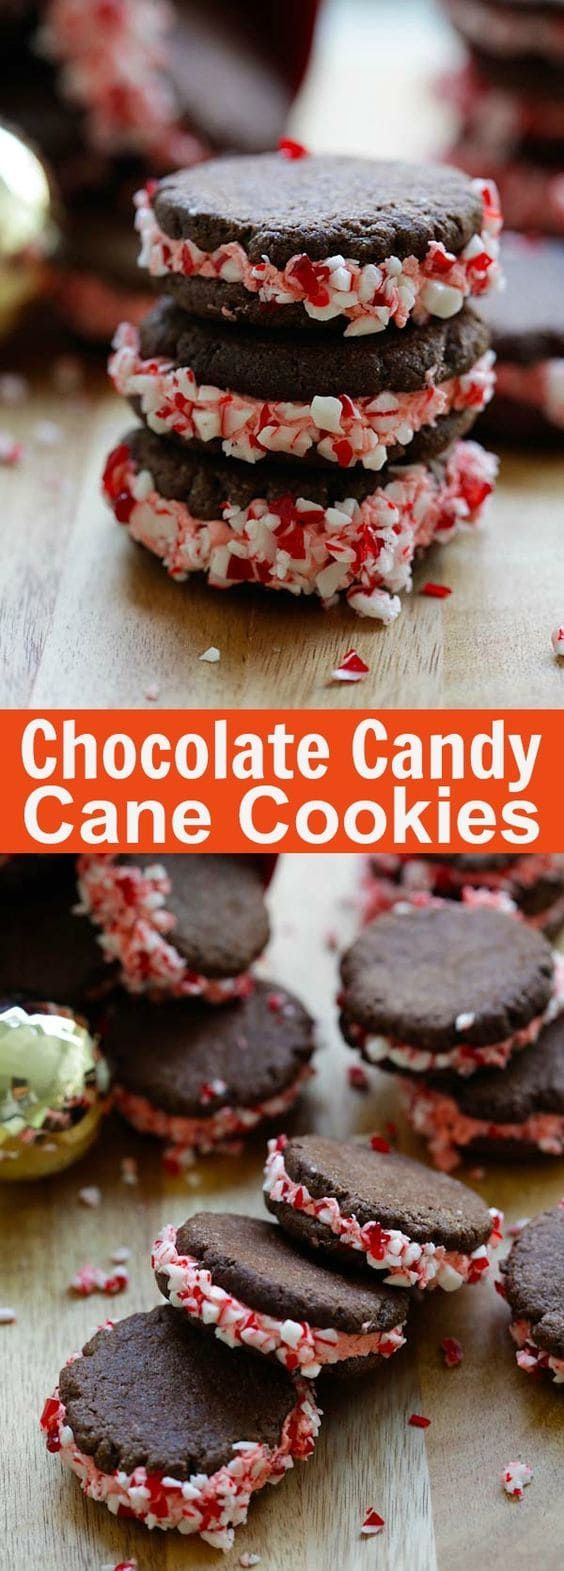 Chocolate-Candy-Cane-Cookies